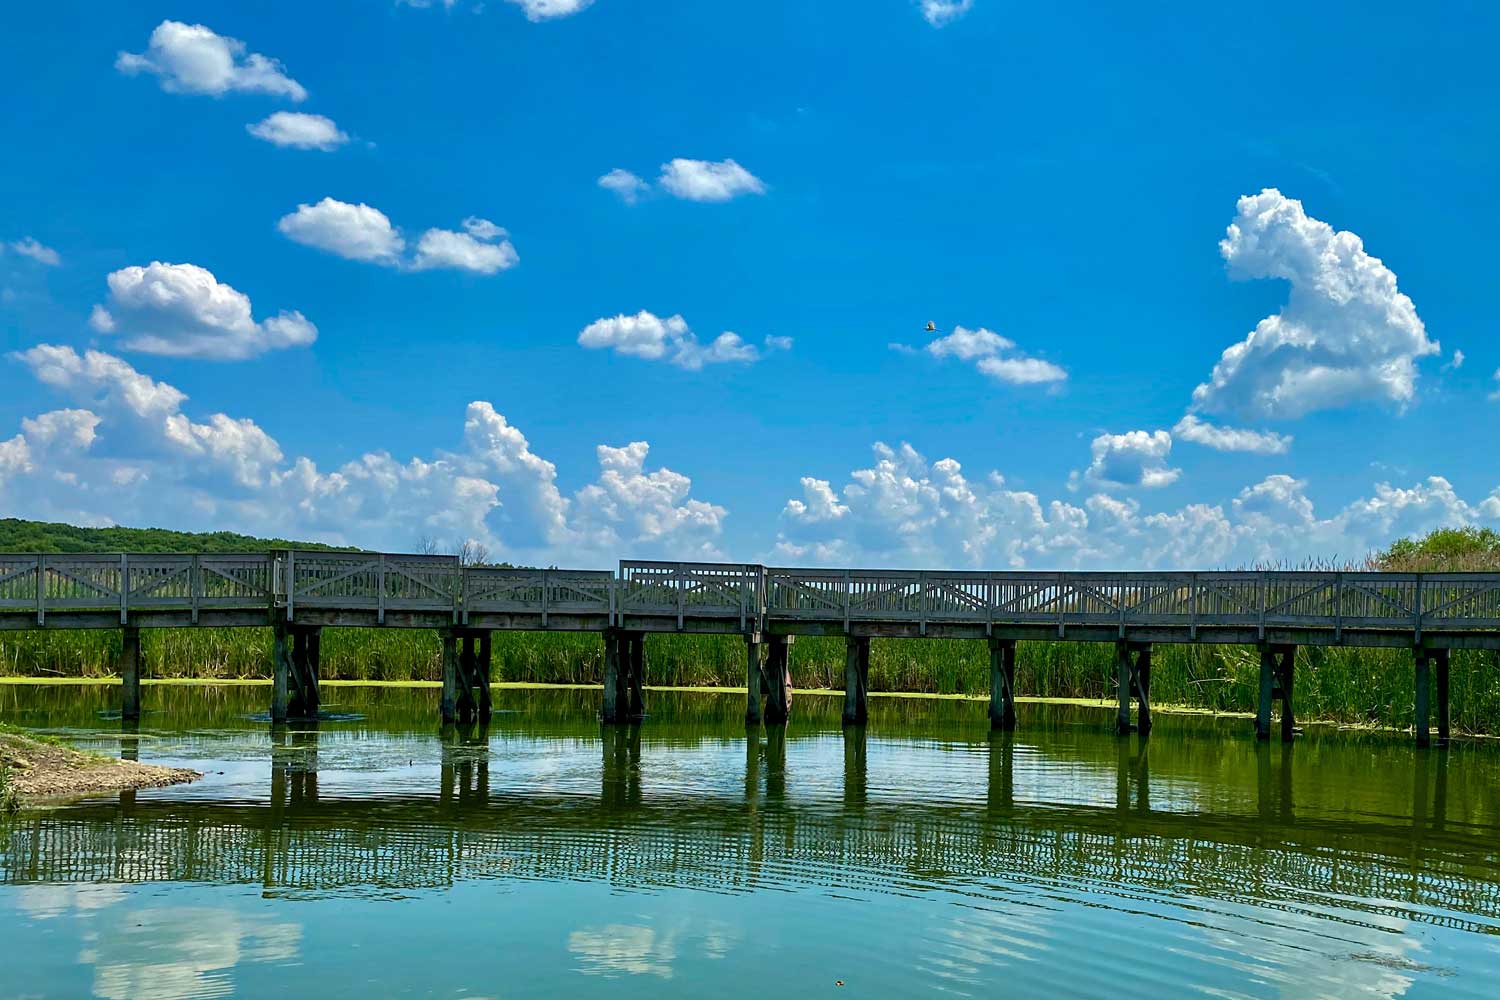 A wooden bridge spanning a waterway with a bright blue sky with sparse puffy white clouds.